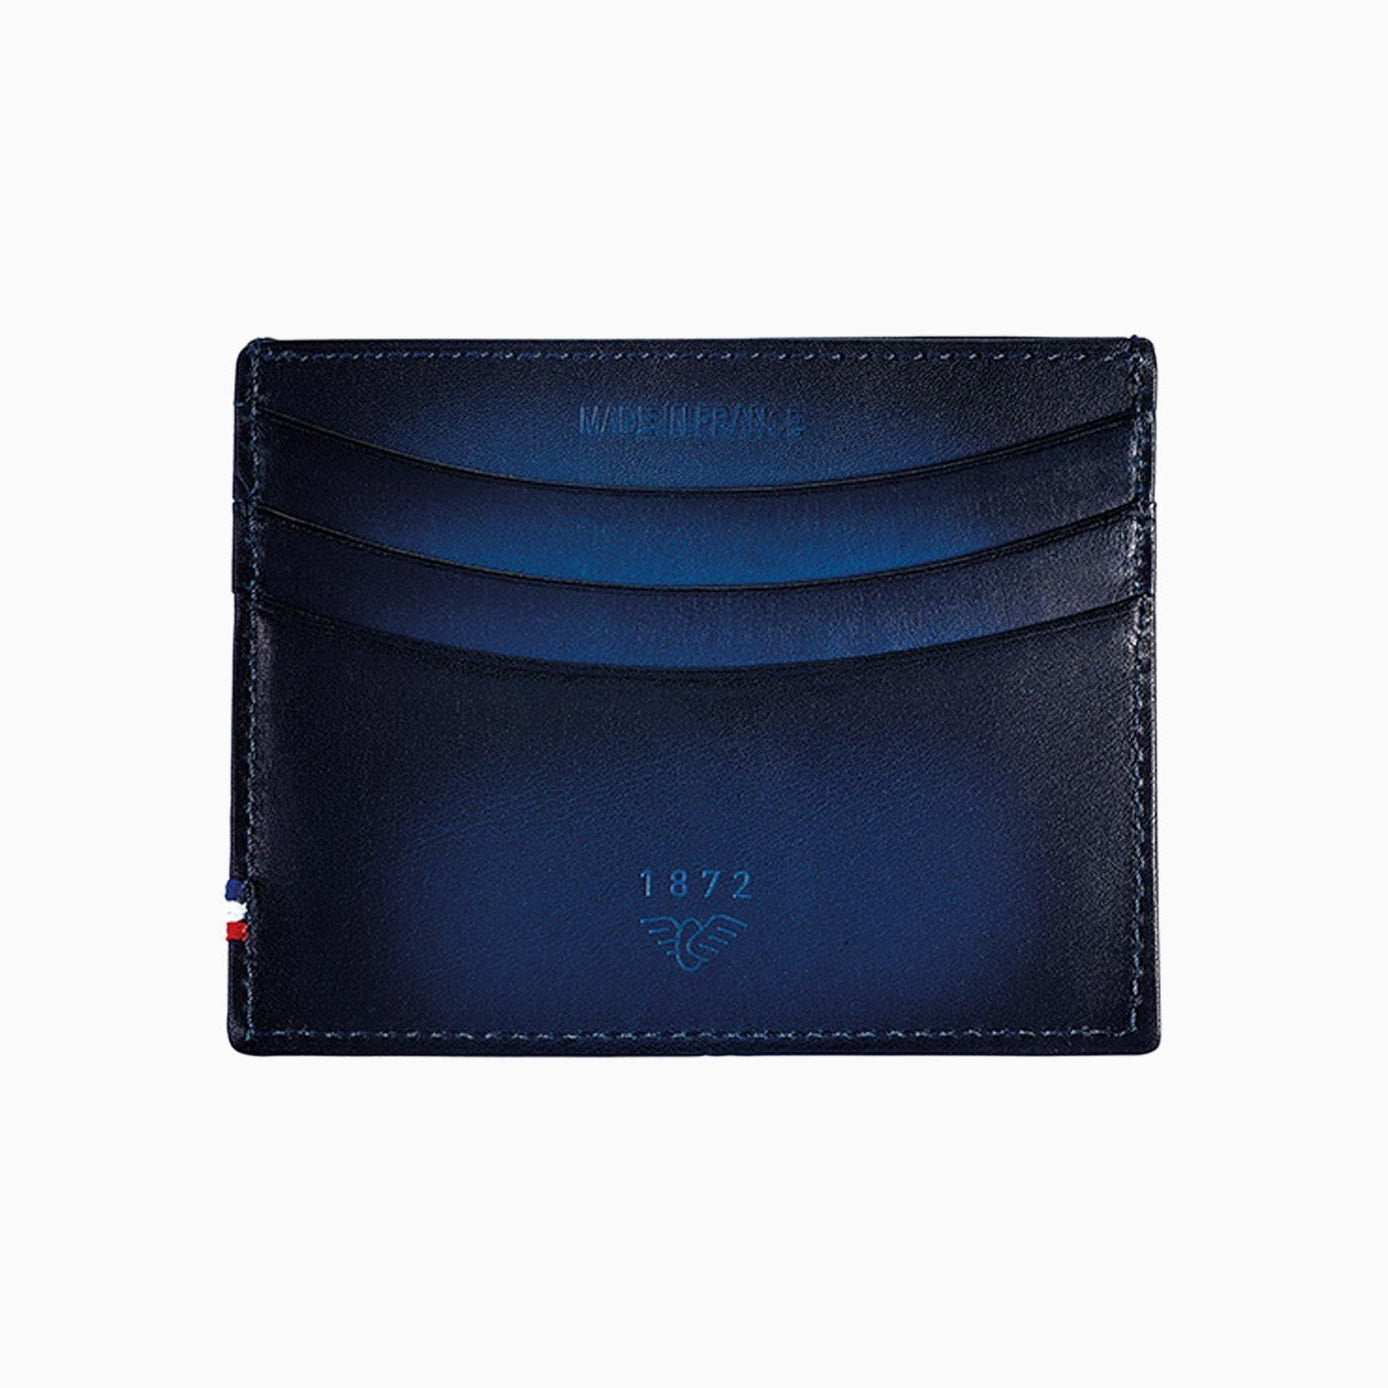 Habanos Specialist Vietnam ACCESSORIES [style_3597390228048] Ví da màu xanh đậm hiệu S.T.Dupont (LEATHER CREDIT CARD HOLDER style no 190212).